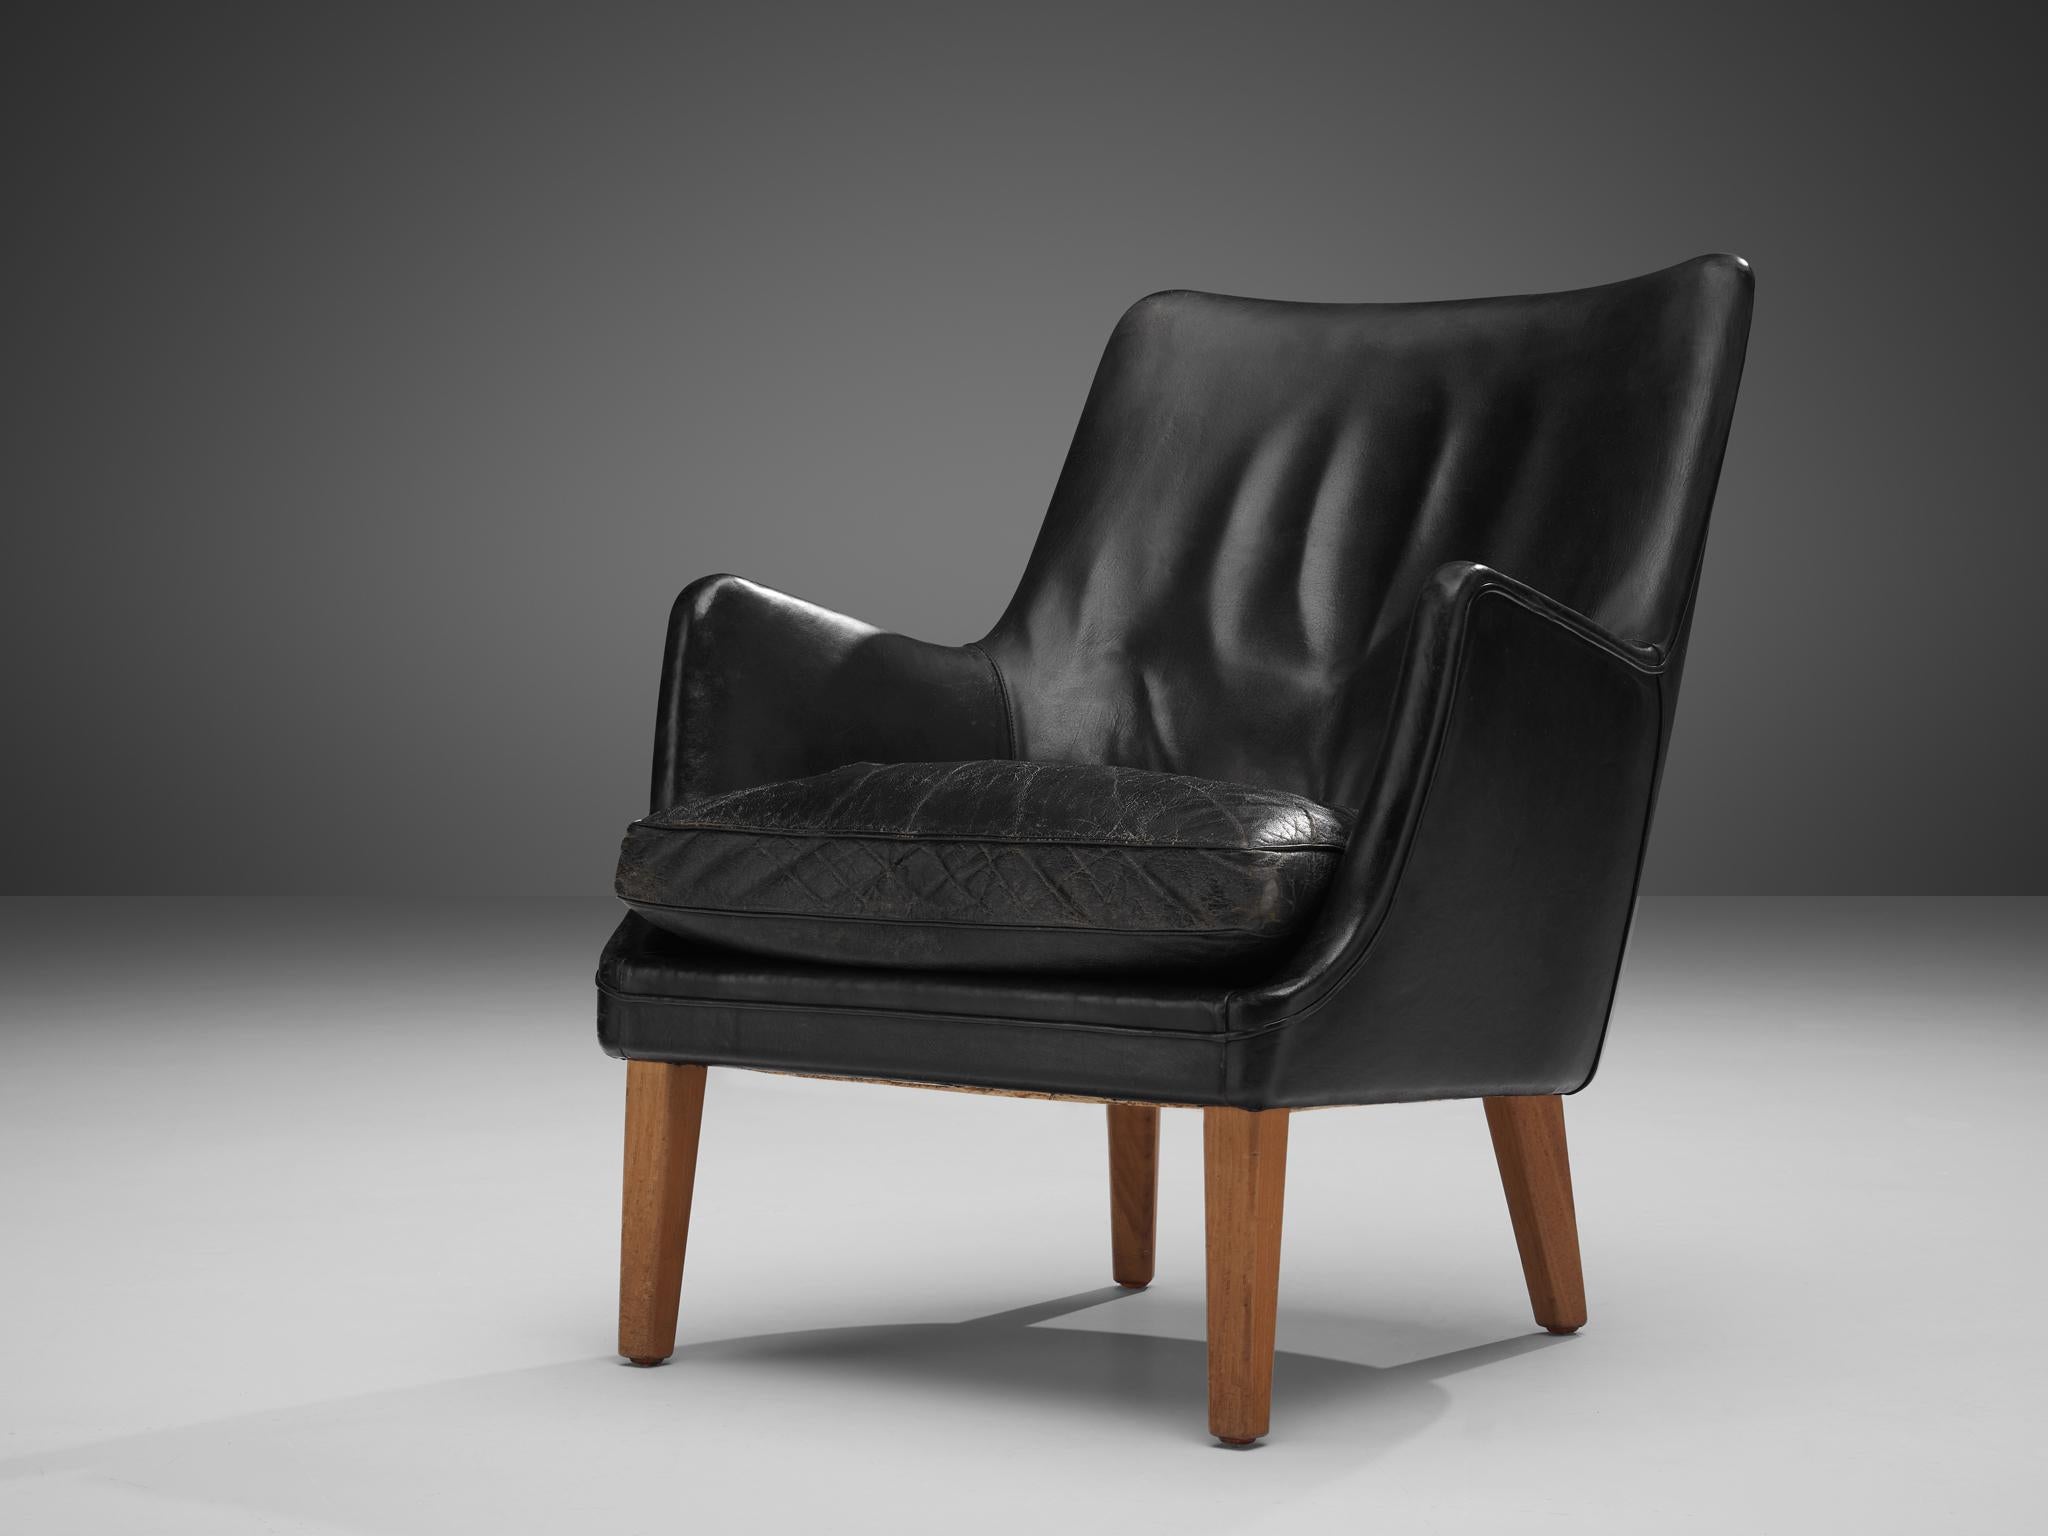 Arne Vodder for Ivan Schlechter, lounge chair, leather, teak, Denmark, 1953

This distinct design is by Danish master Arne Vodder, and manufactured by Ivan Schlechter The exterior of the lounge chair is created by the high, slanted backrest with